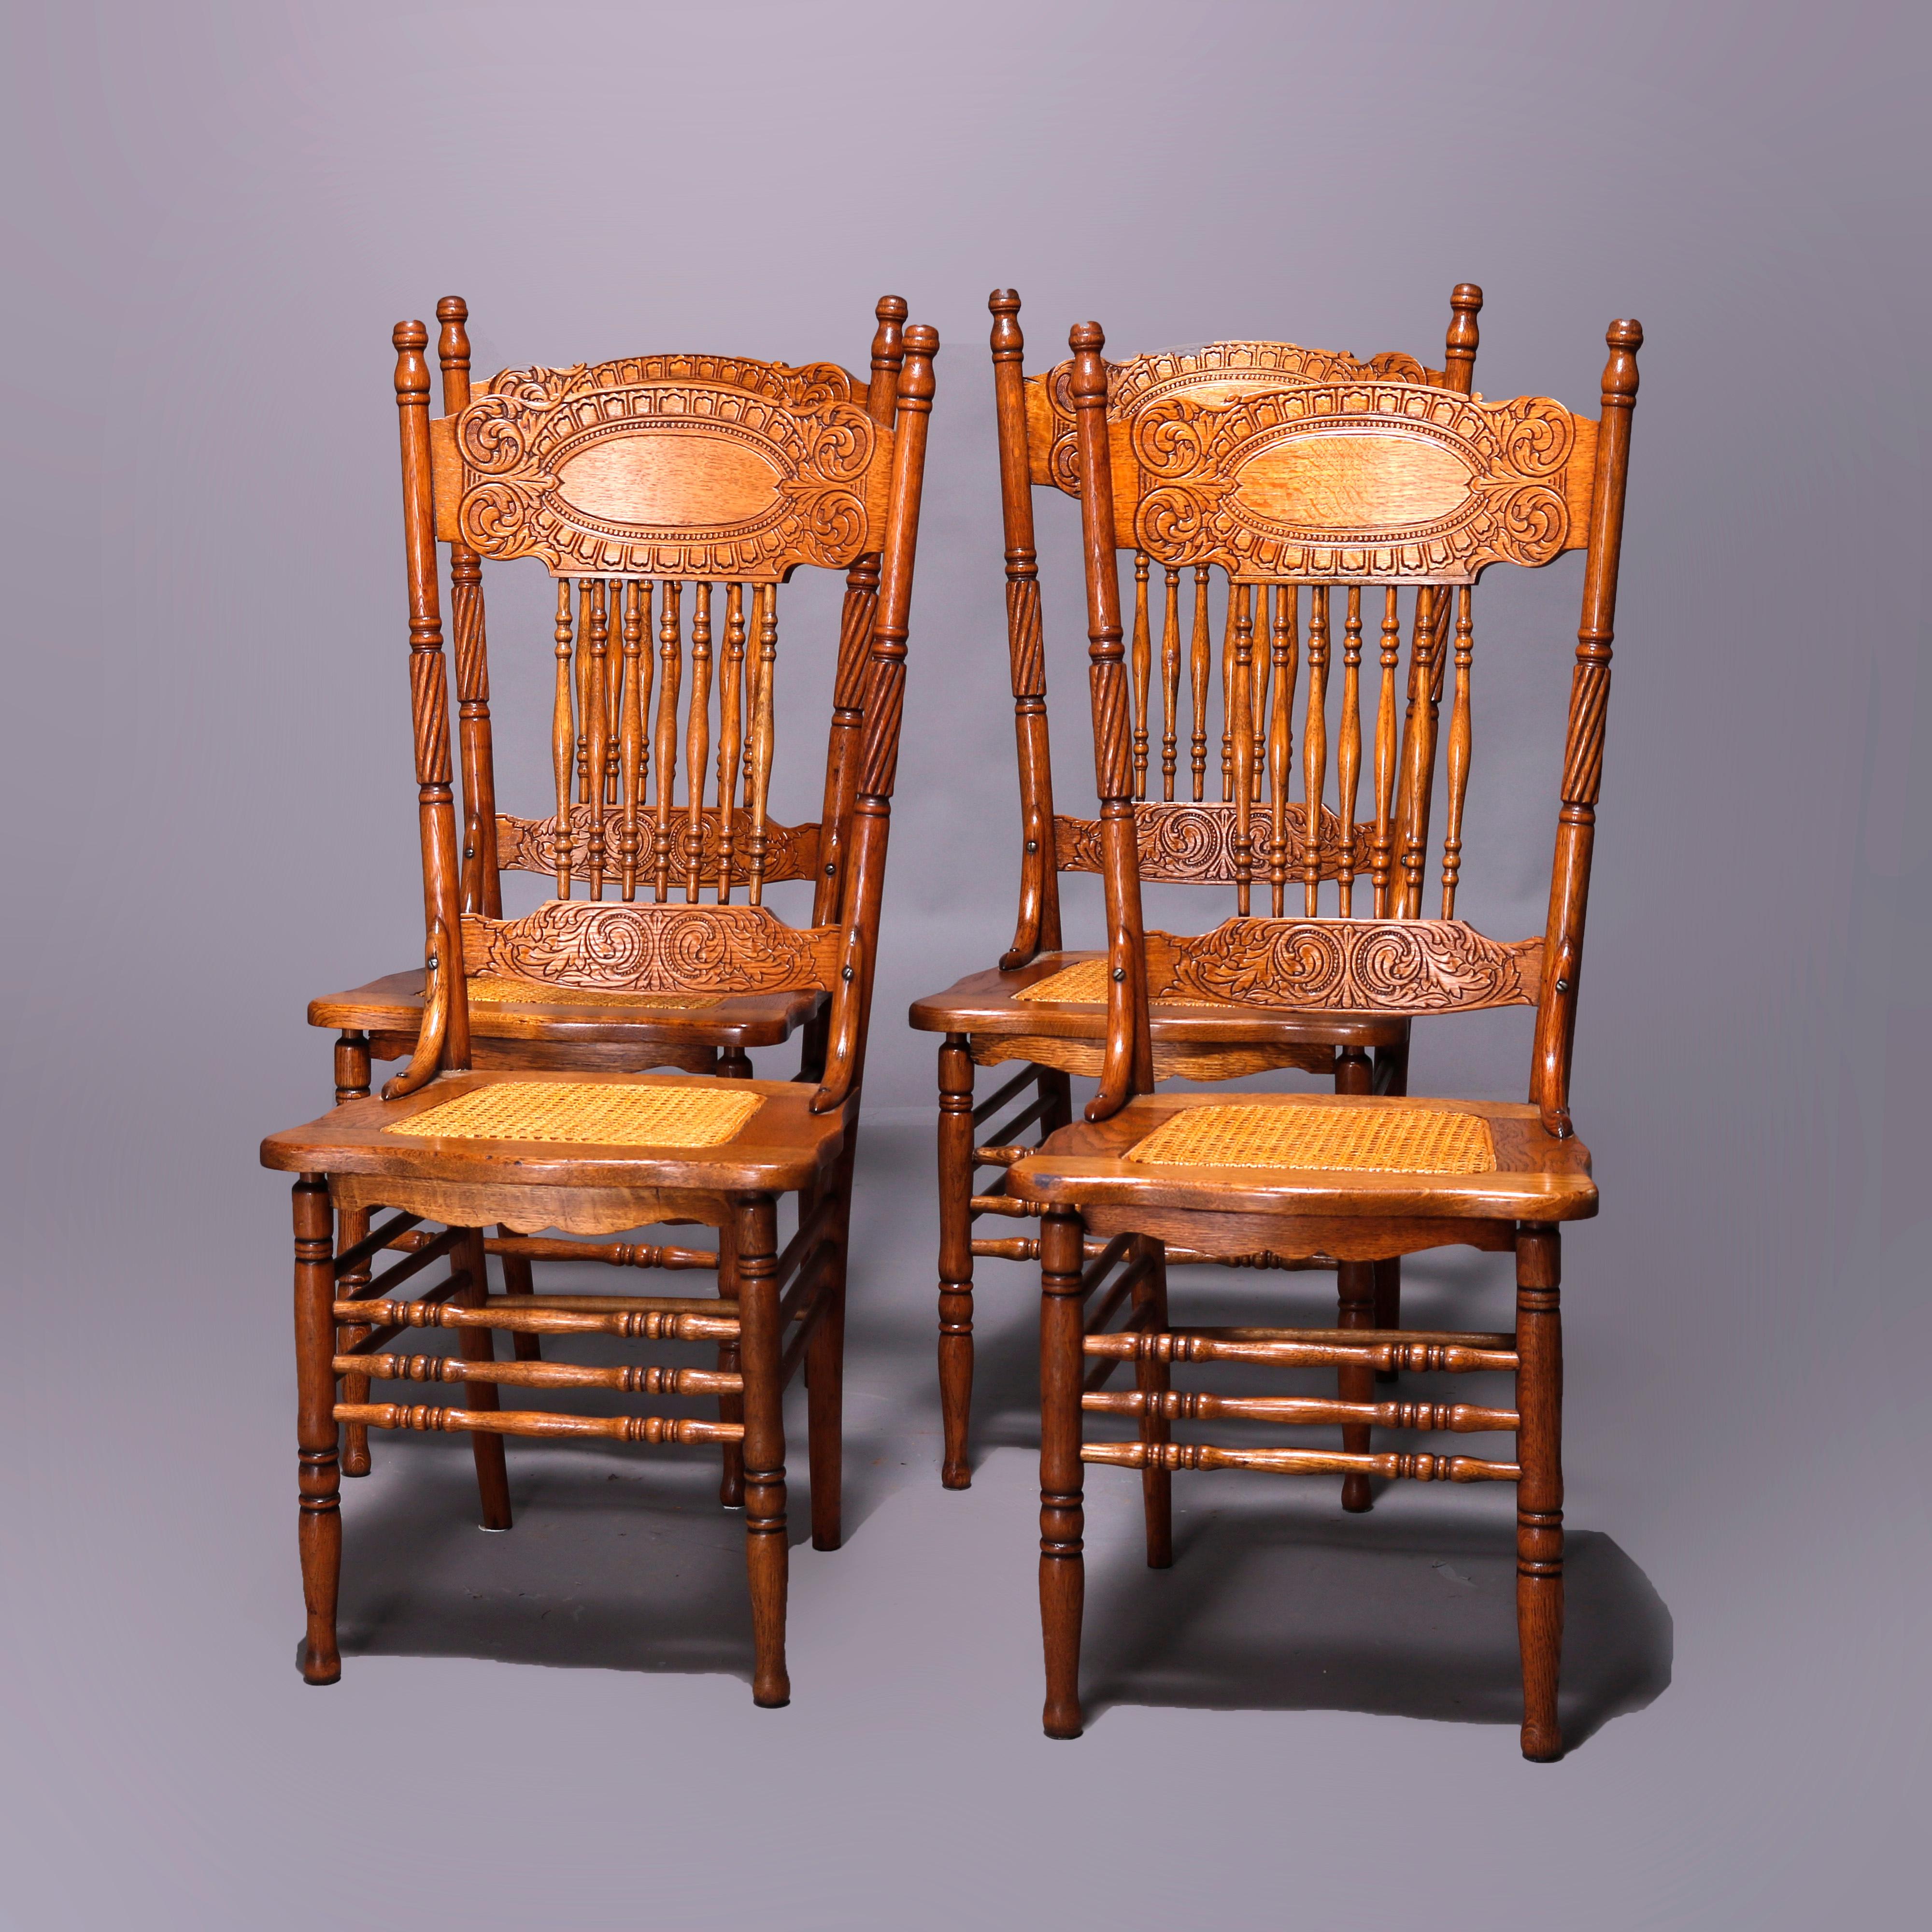 A set of four antique Larkin #1 dining chairs offer quarter sawn oak construction with double pressed back having foliate design over spindle support and cane seats, circa 1910

Measures - 43.25'' H x 19.25'' W x 22'' D.